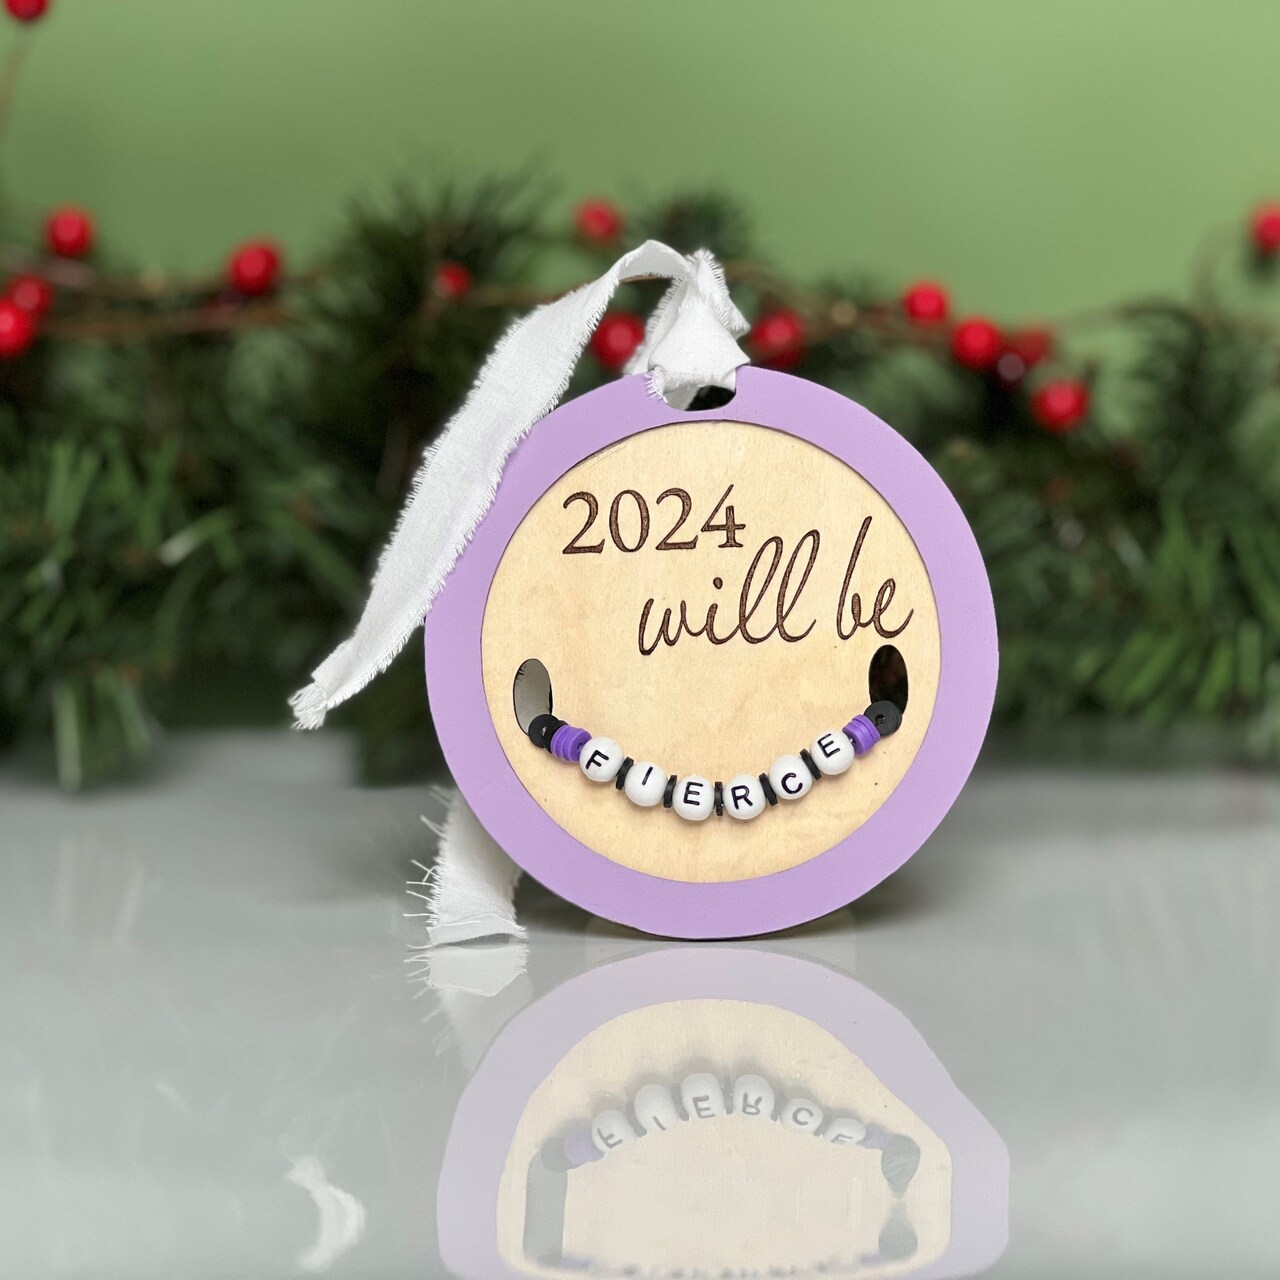 Custom Word of the Year Ornament with Glowforge Aura Laser Printer and Kesley Anderson